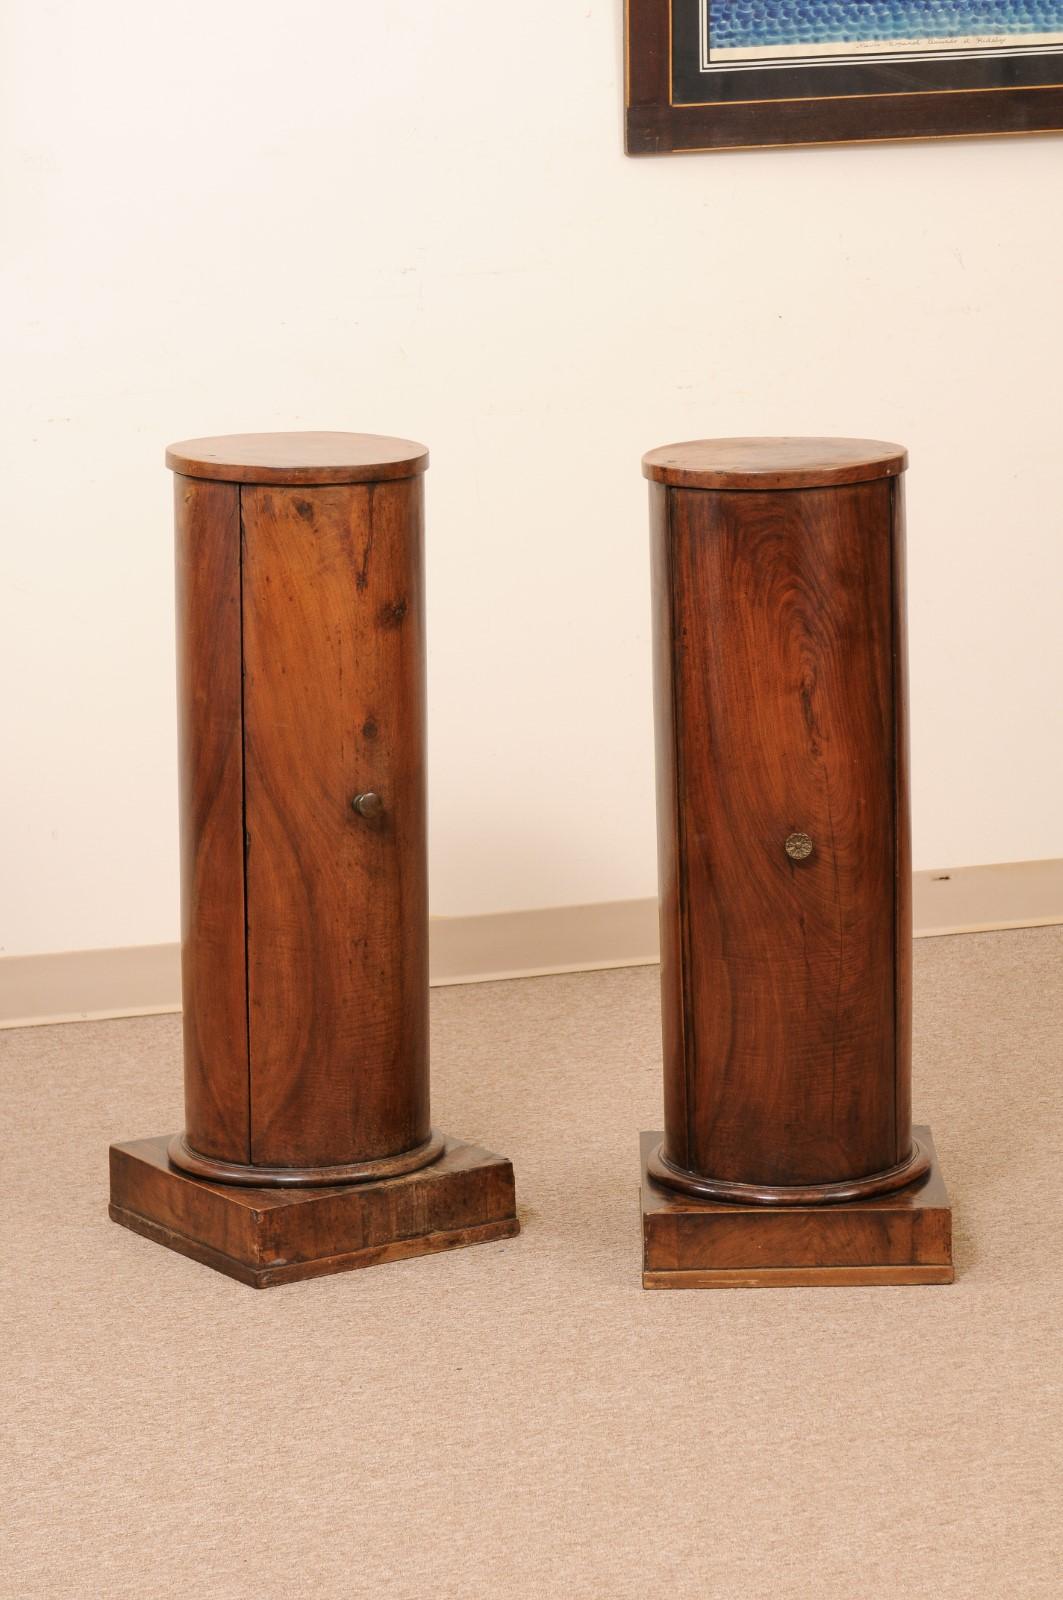 Pair of Early 19th Century Italian Neoclassical Walnut Pedestal Cabinets For Sale 1